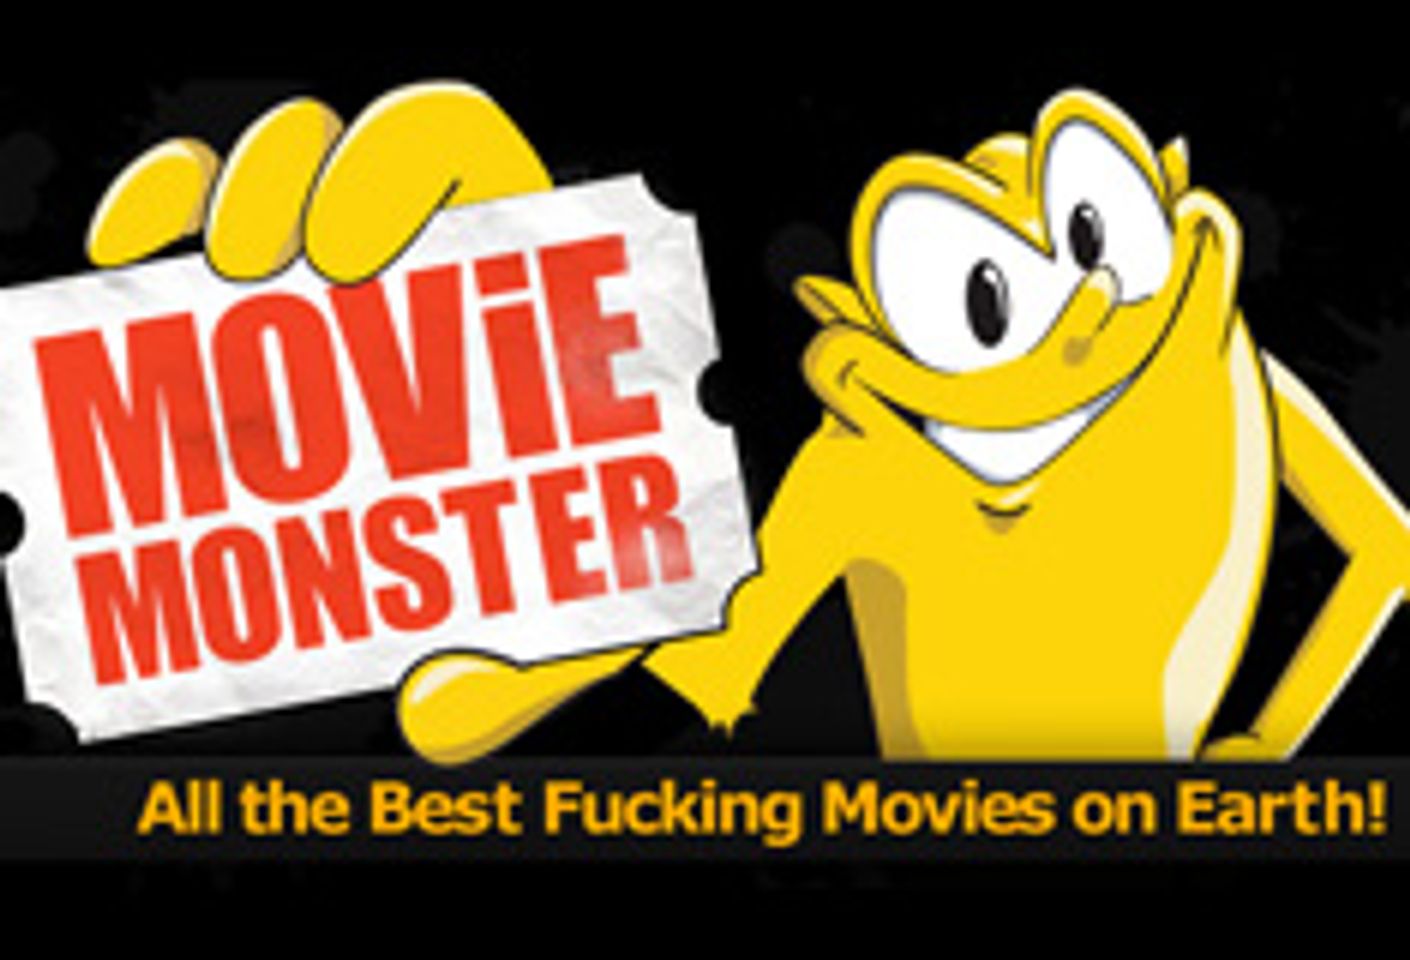 MovieMonster.com Is Now Certified By WebsiteSecure.org